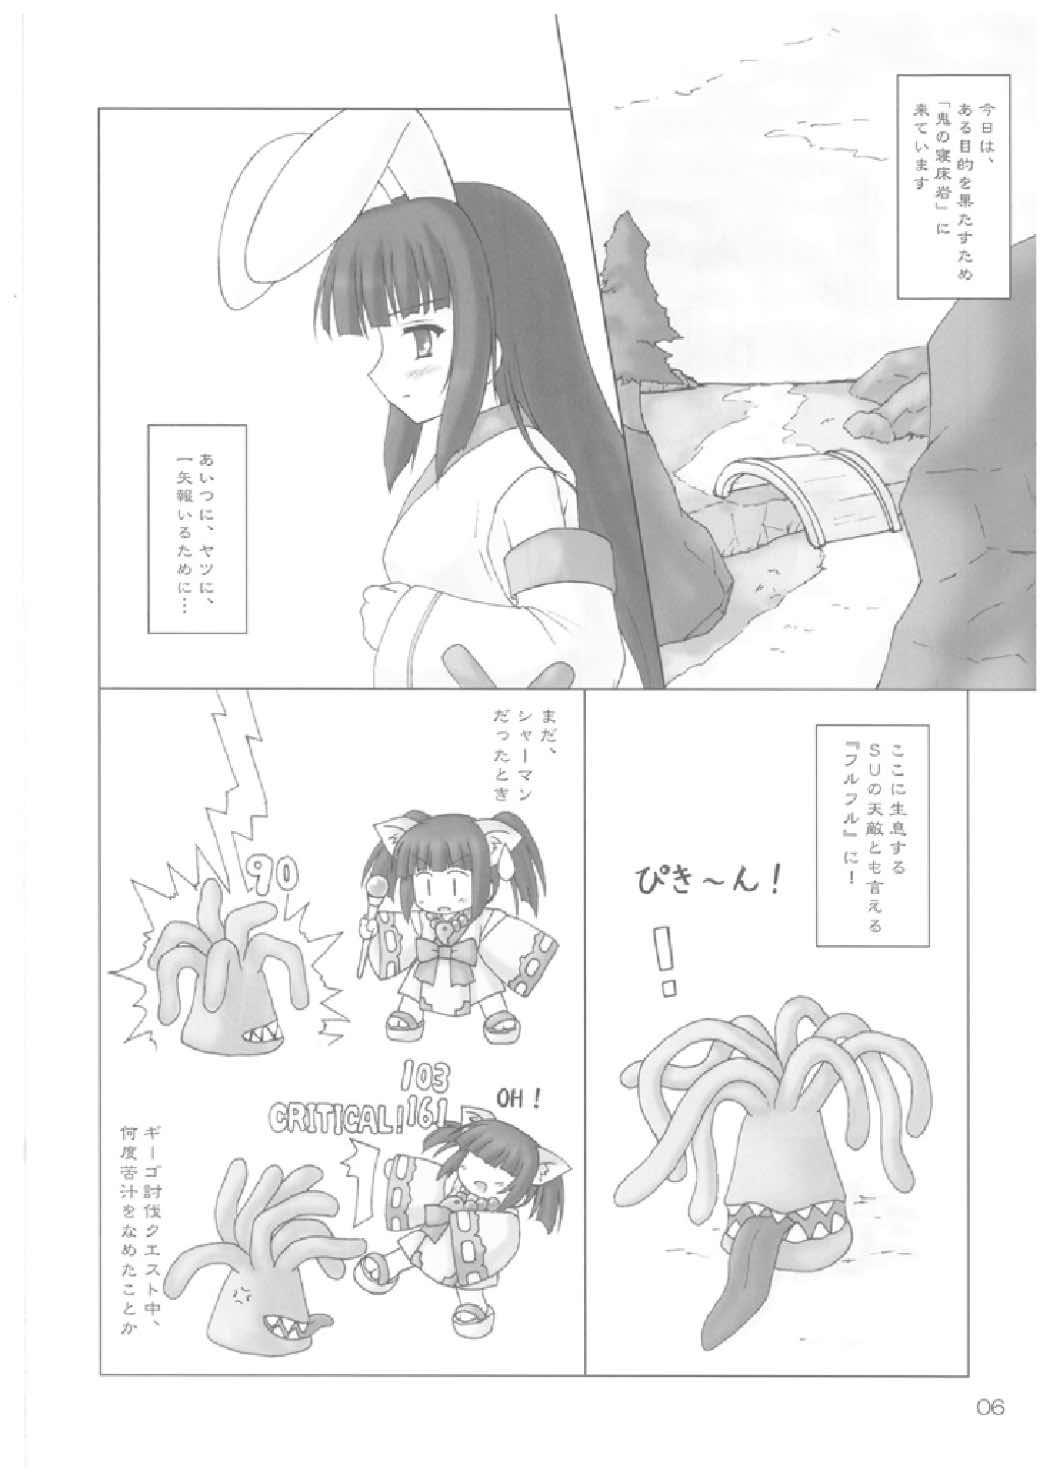 Scene Elementaler Confusion Obscenity - Emil chronicle online Ass To Mouth - Page 6